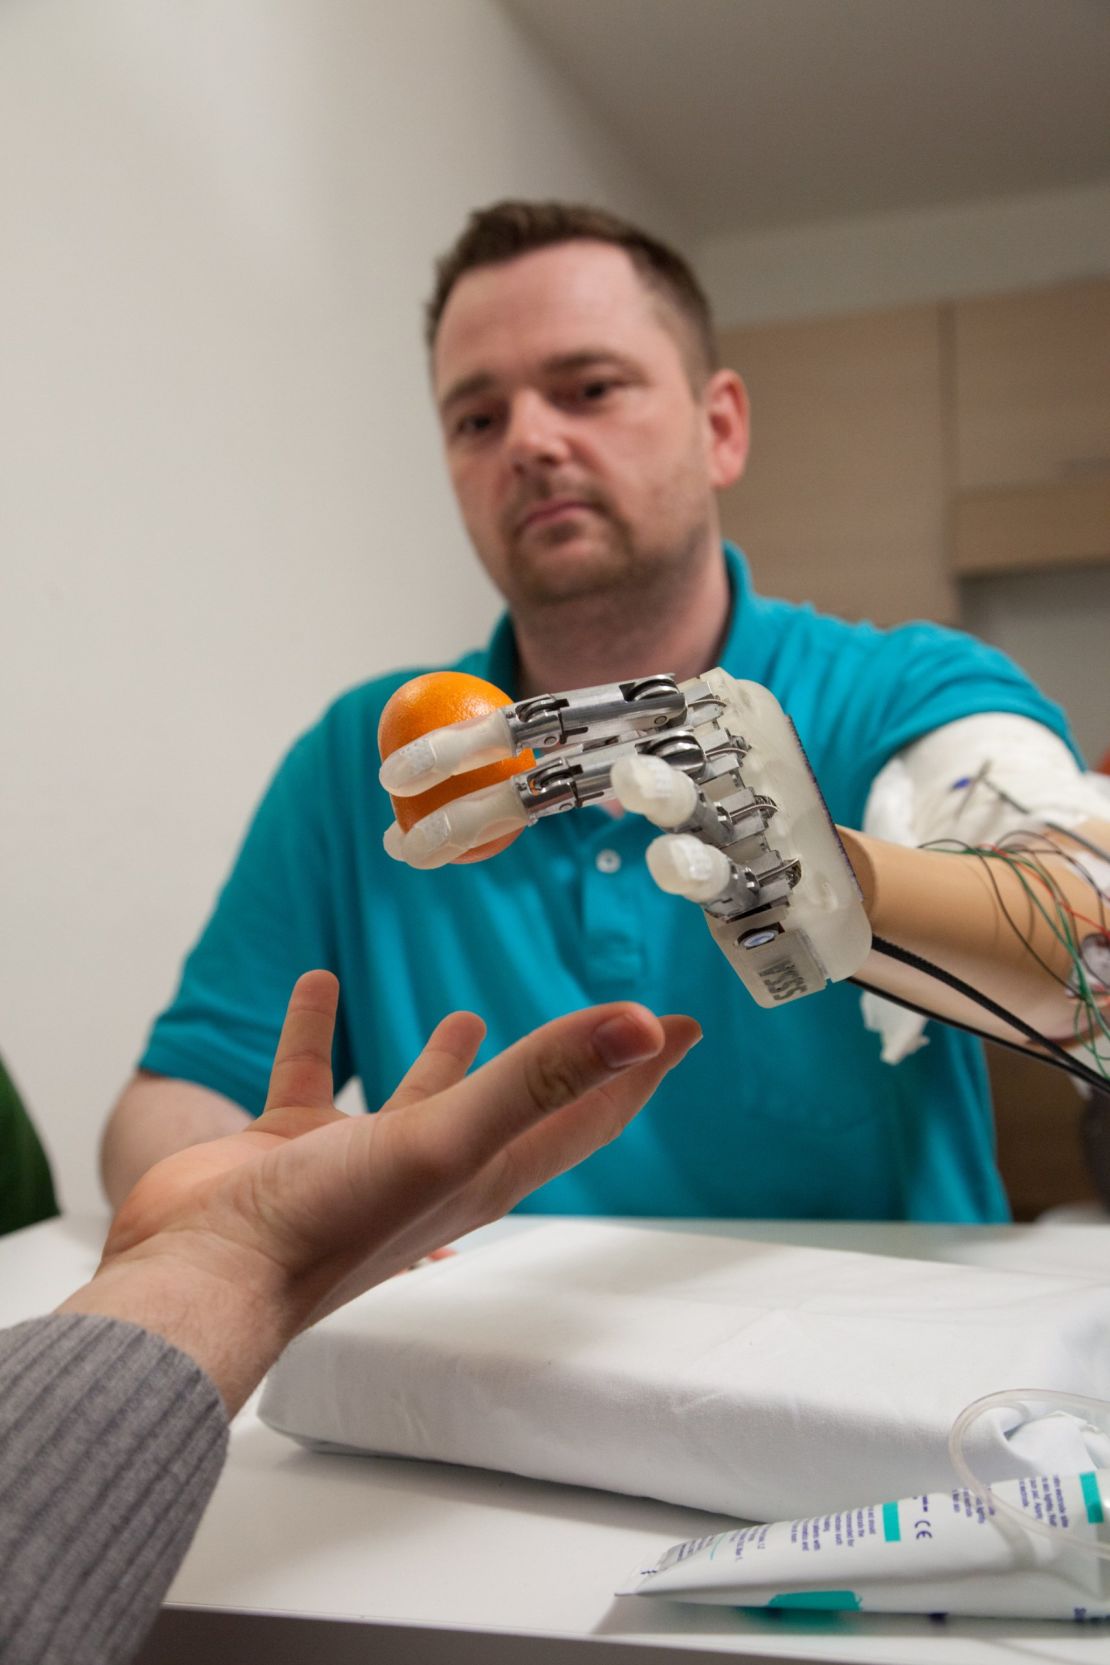 Dennis Aabo Sorensen found it harder to use the artificial hand via visual cues than sensory information.